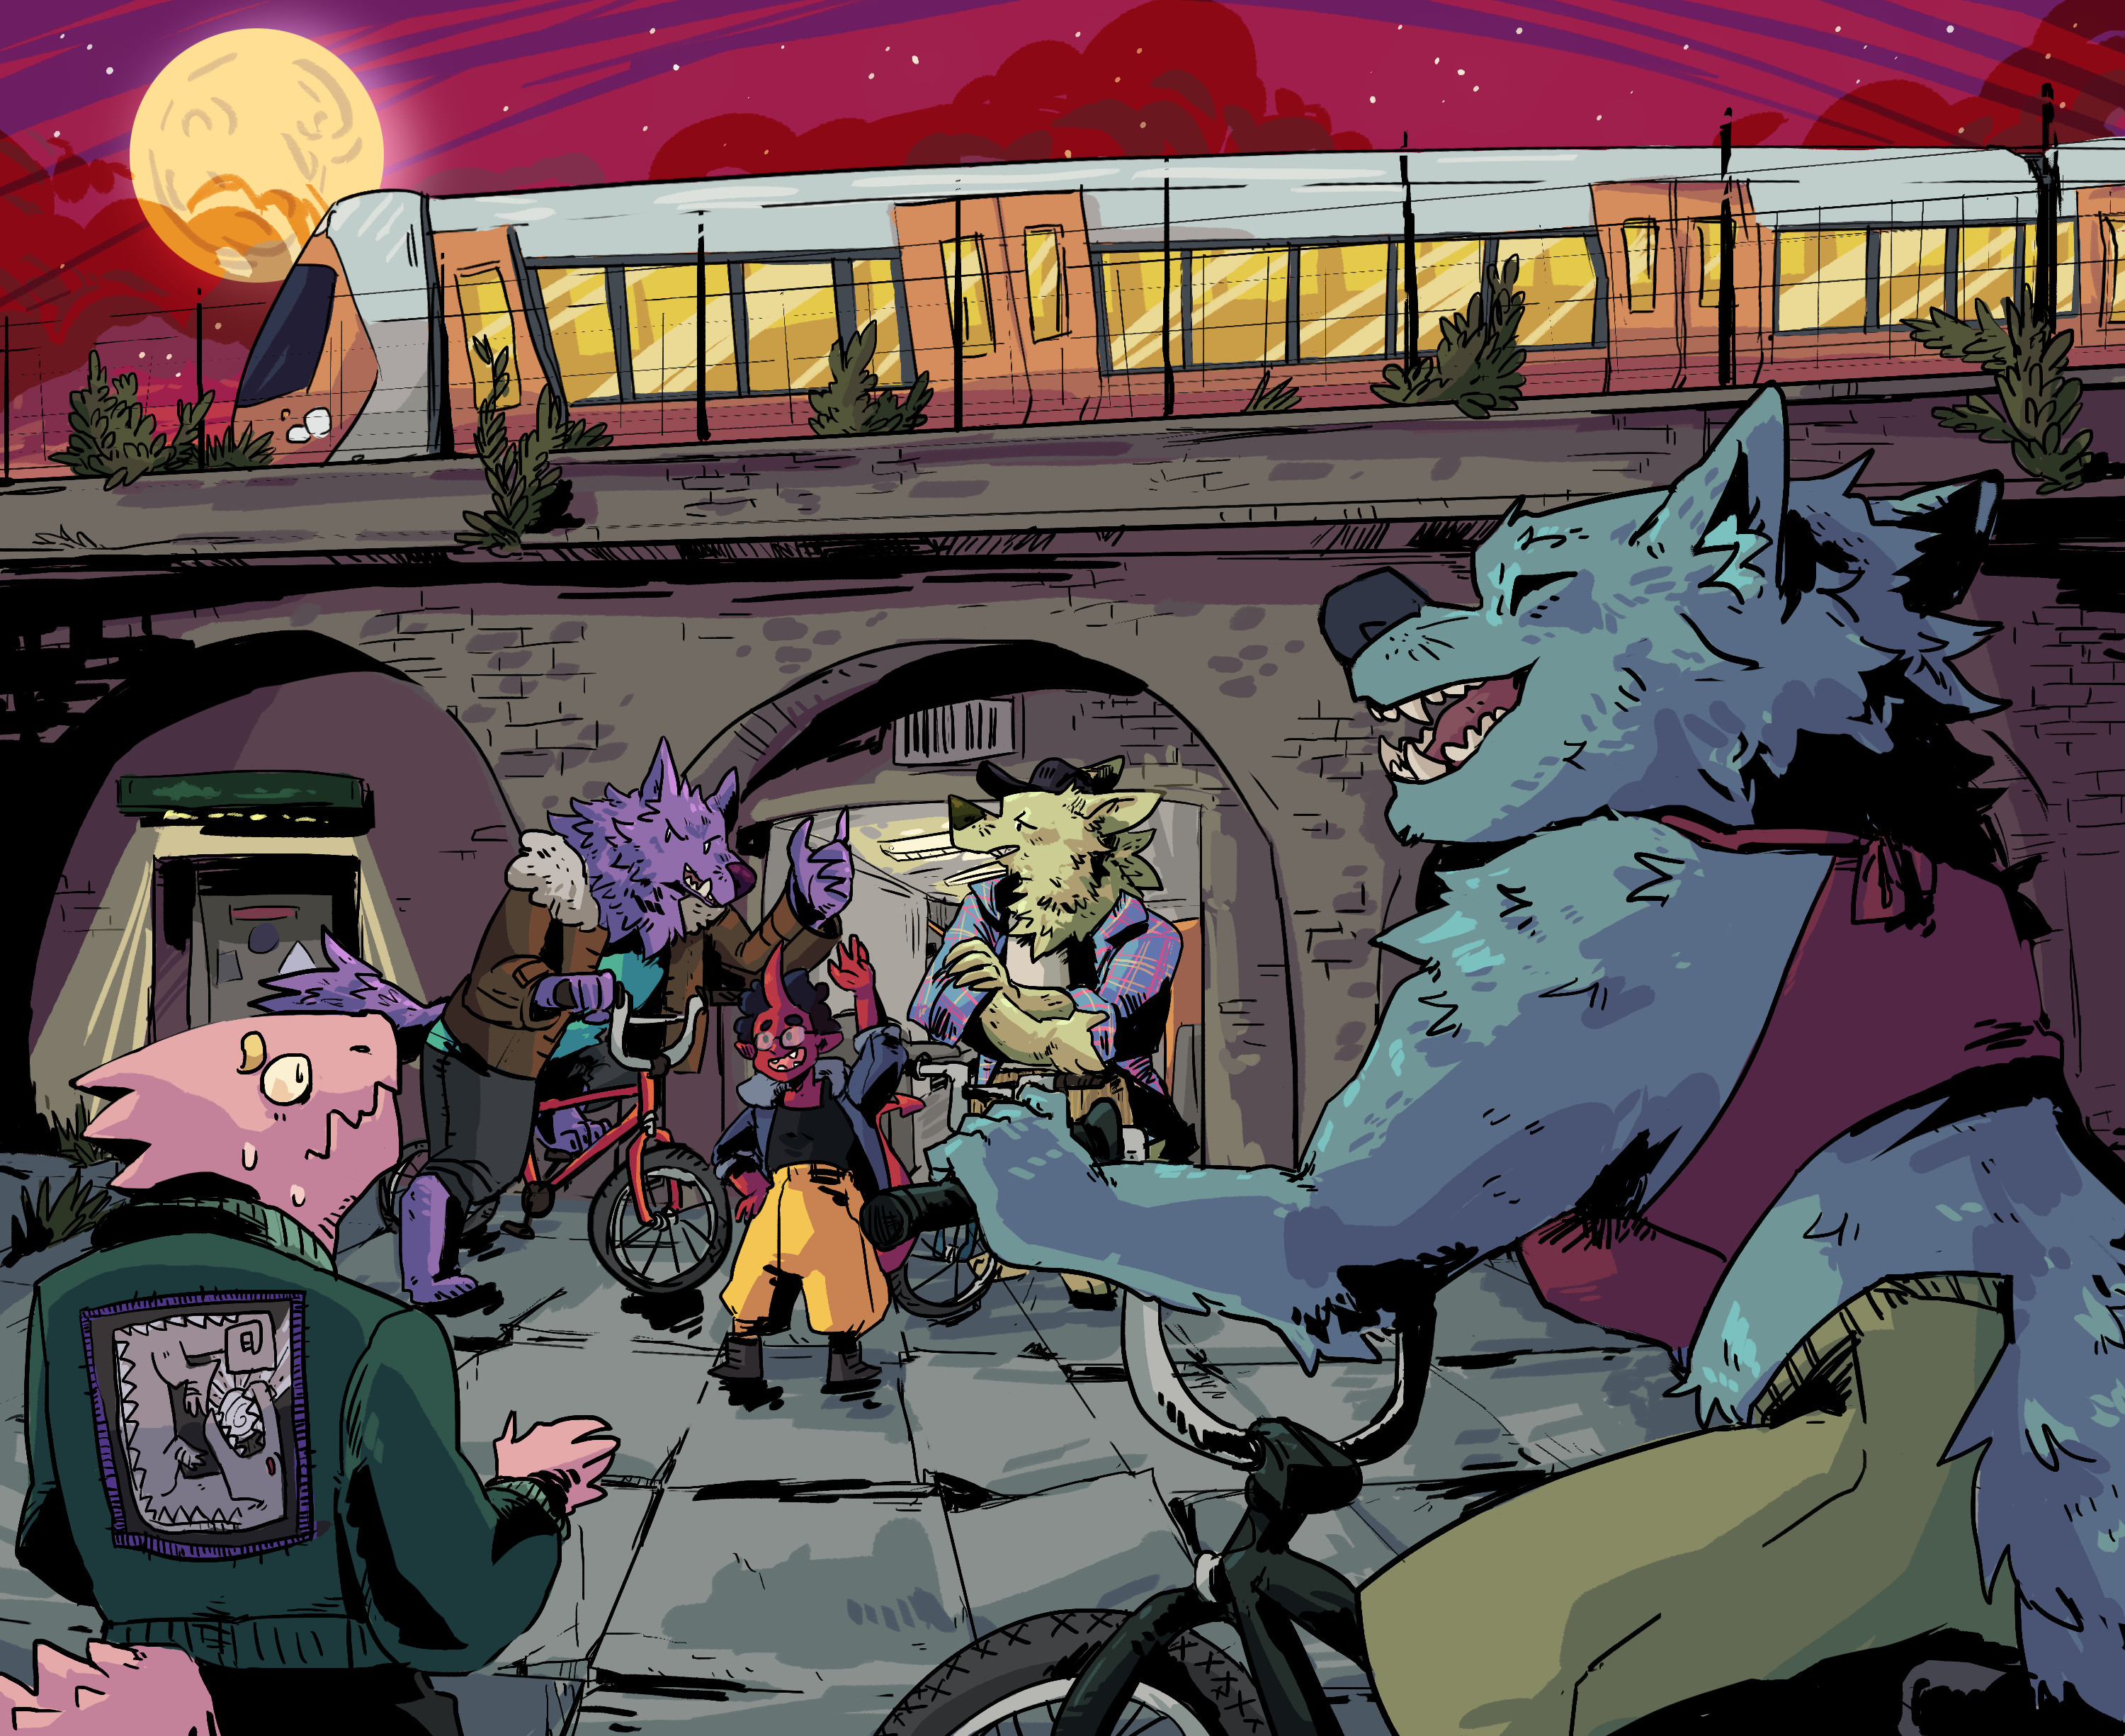 Illustration commission for client's webcomic. Werewolf BMXers designed by me